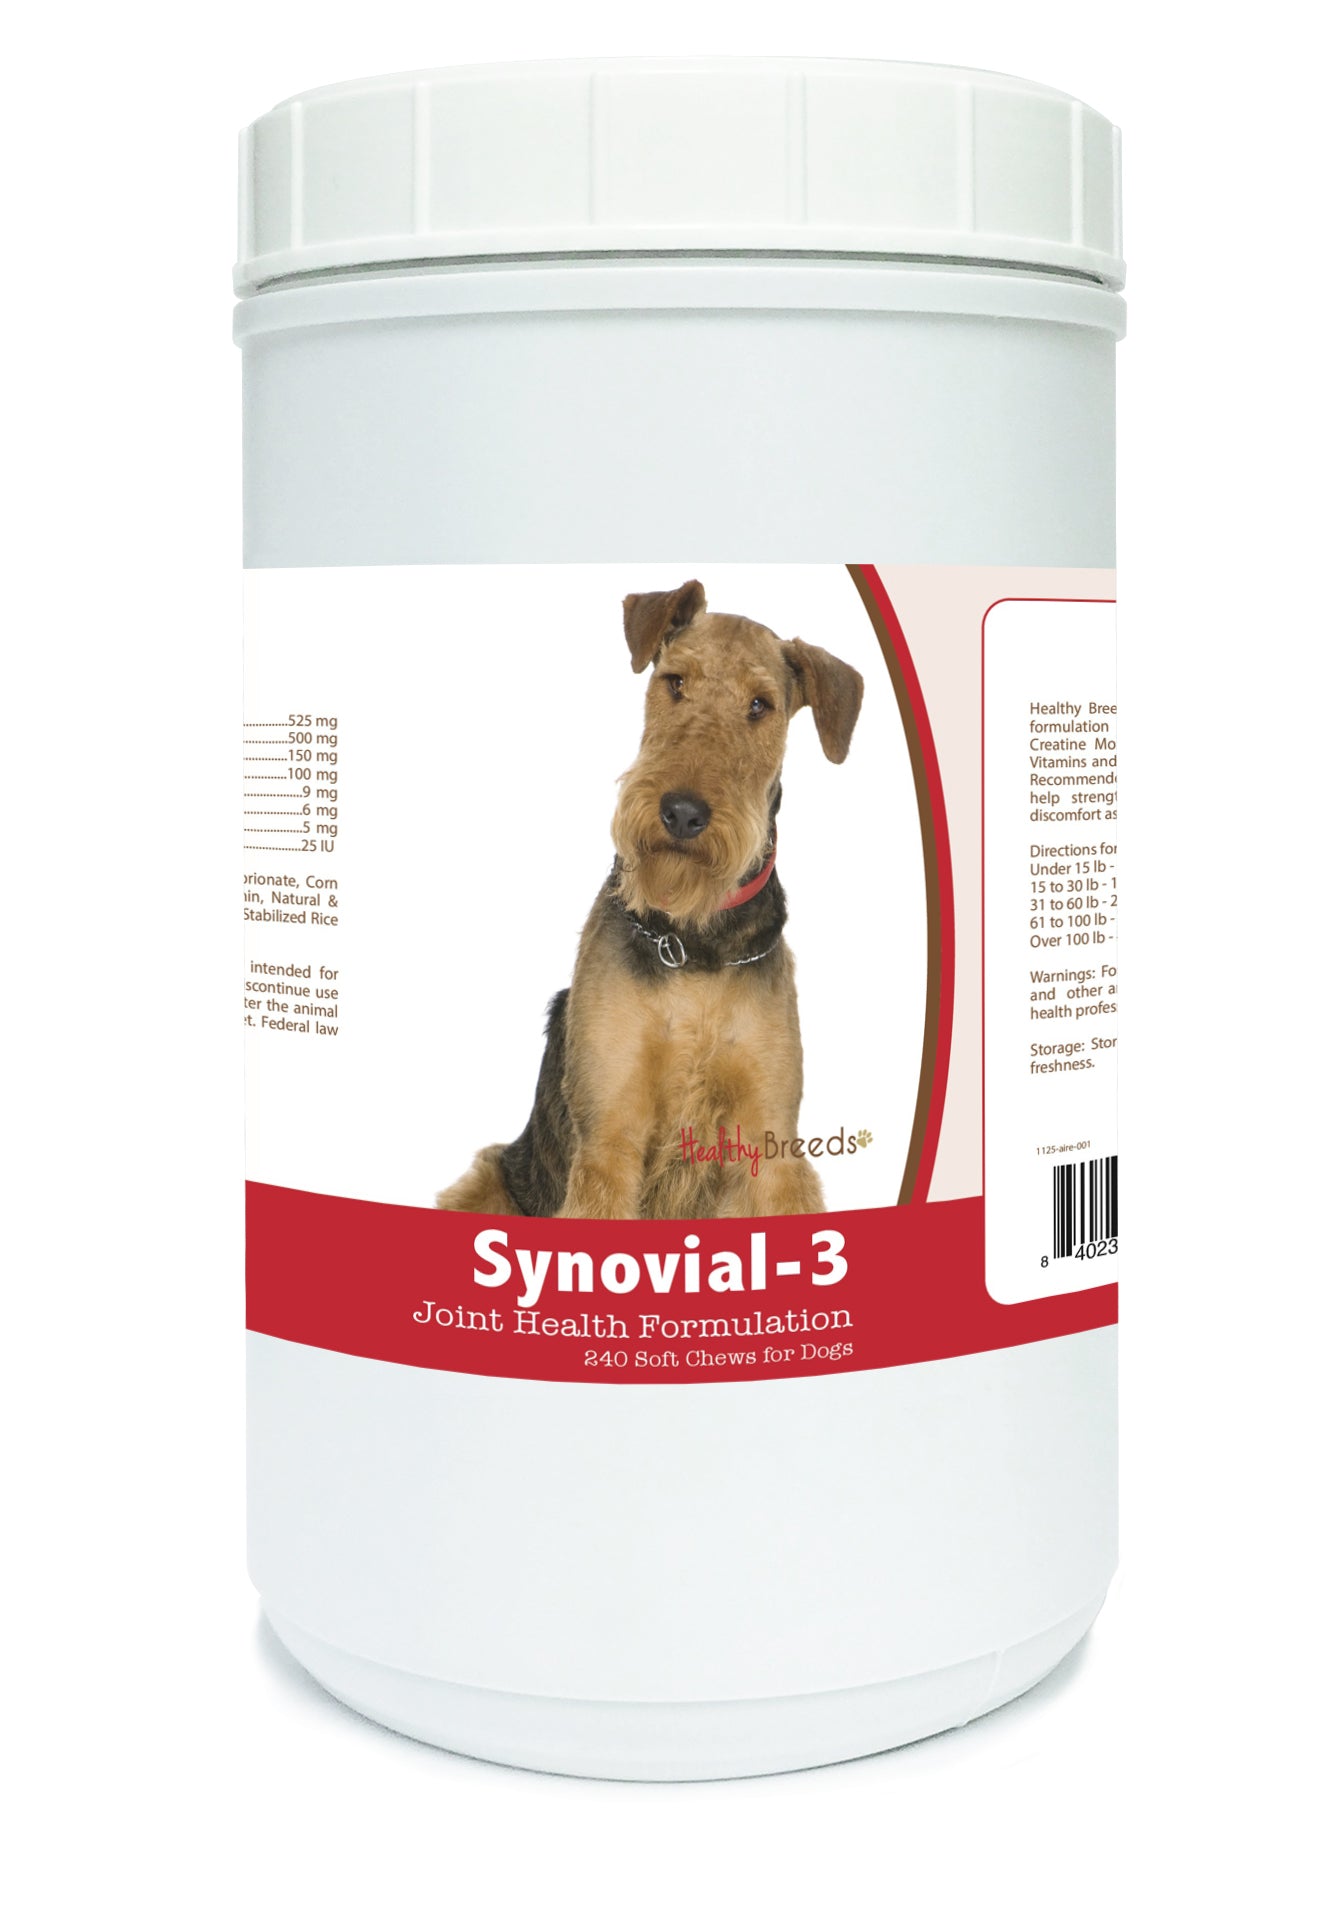 Airedale Terrier Synovial-3 Joint Health Formulation Soft Chews 240 Count